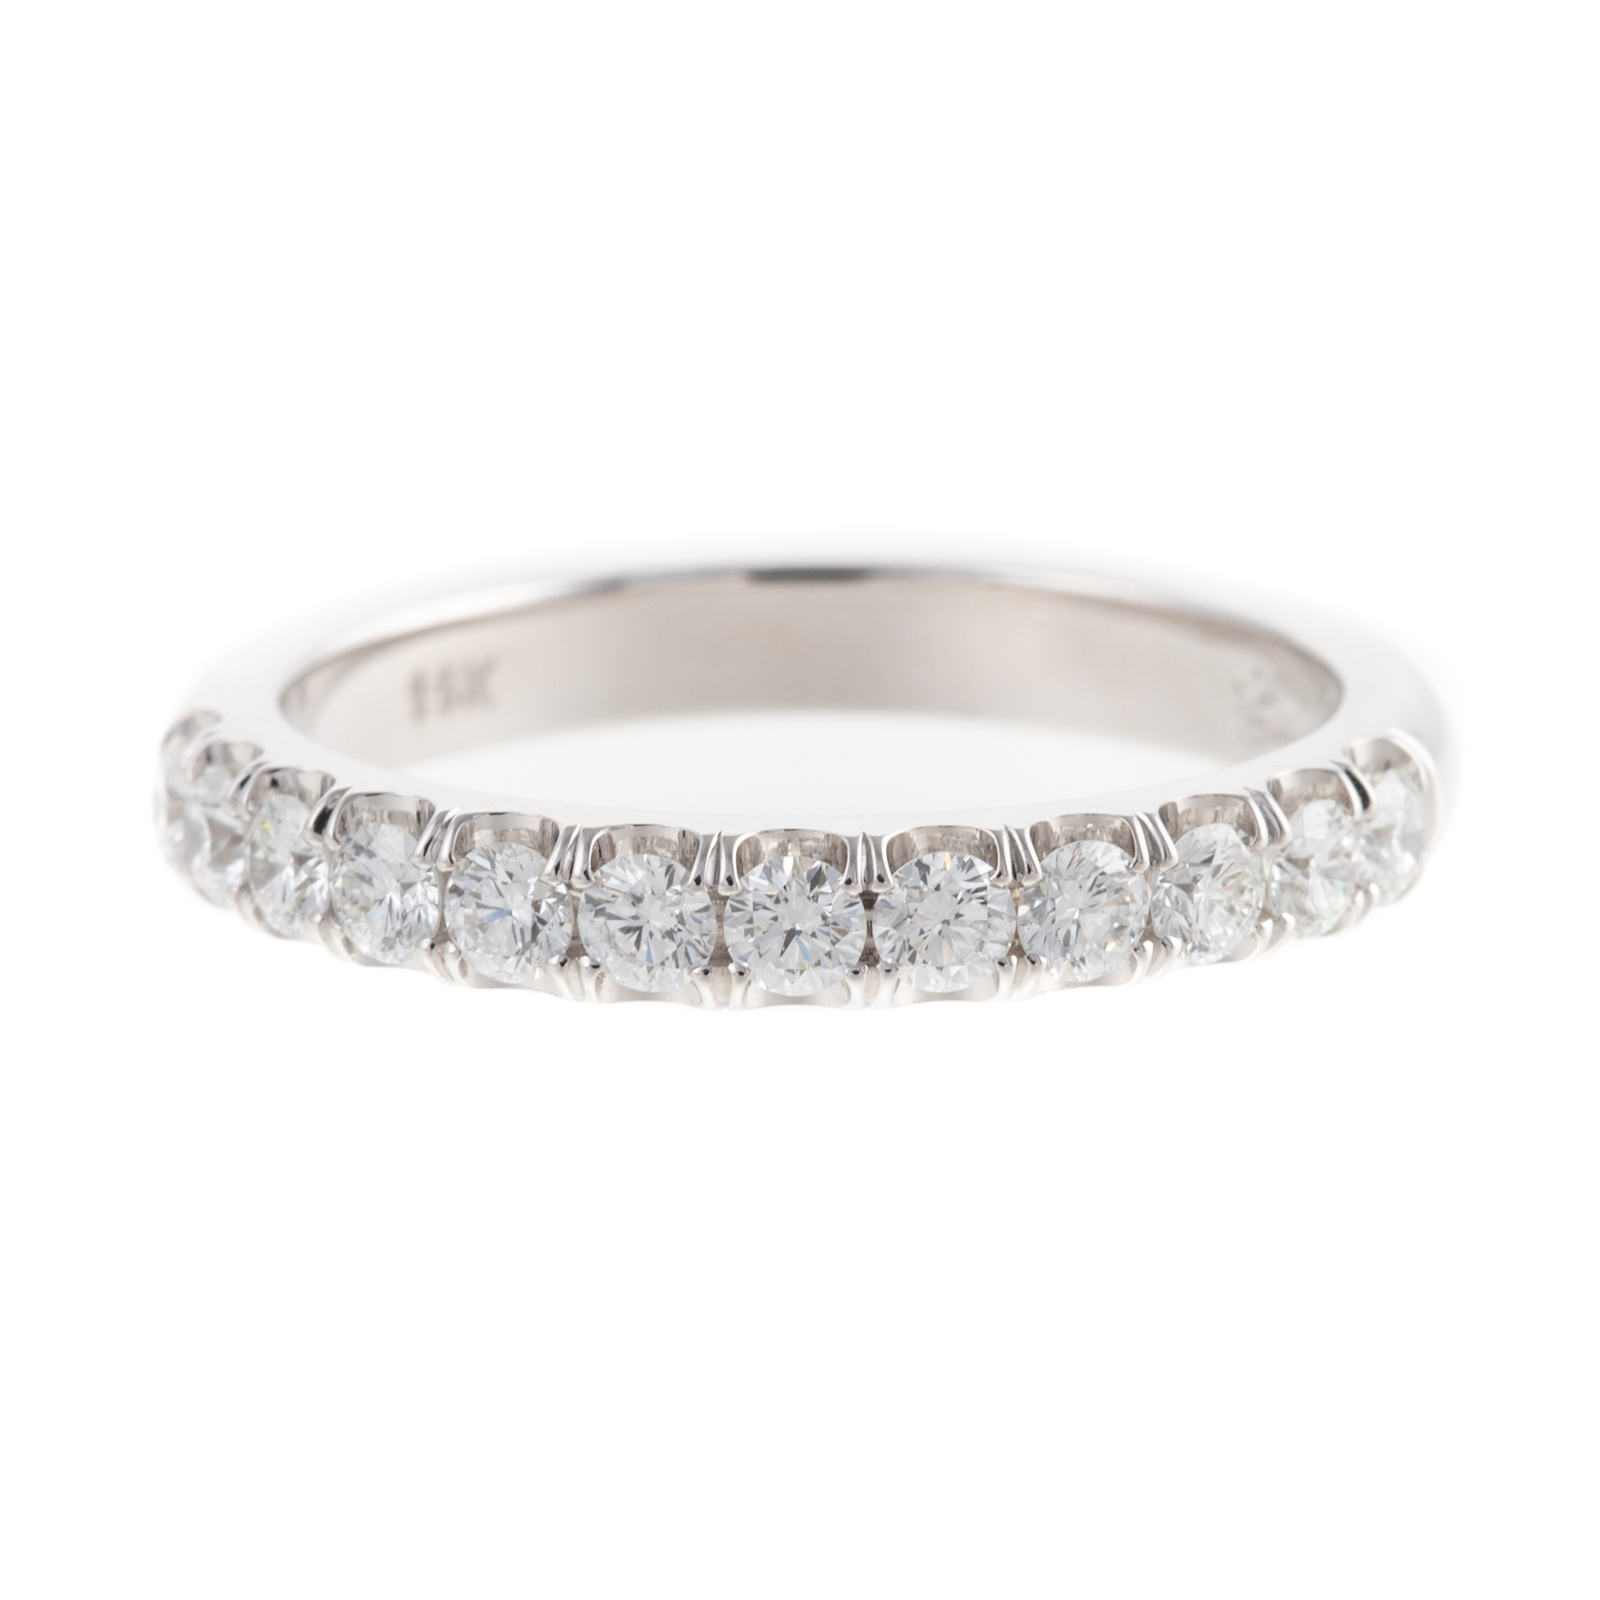 A DIAMOND BAND BY COAST IN 14K 29df6d